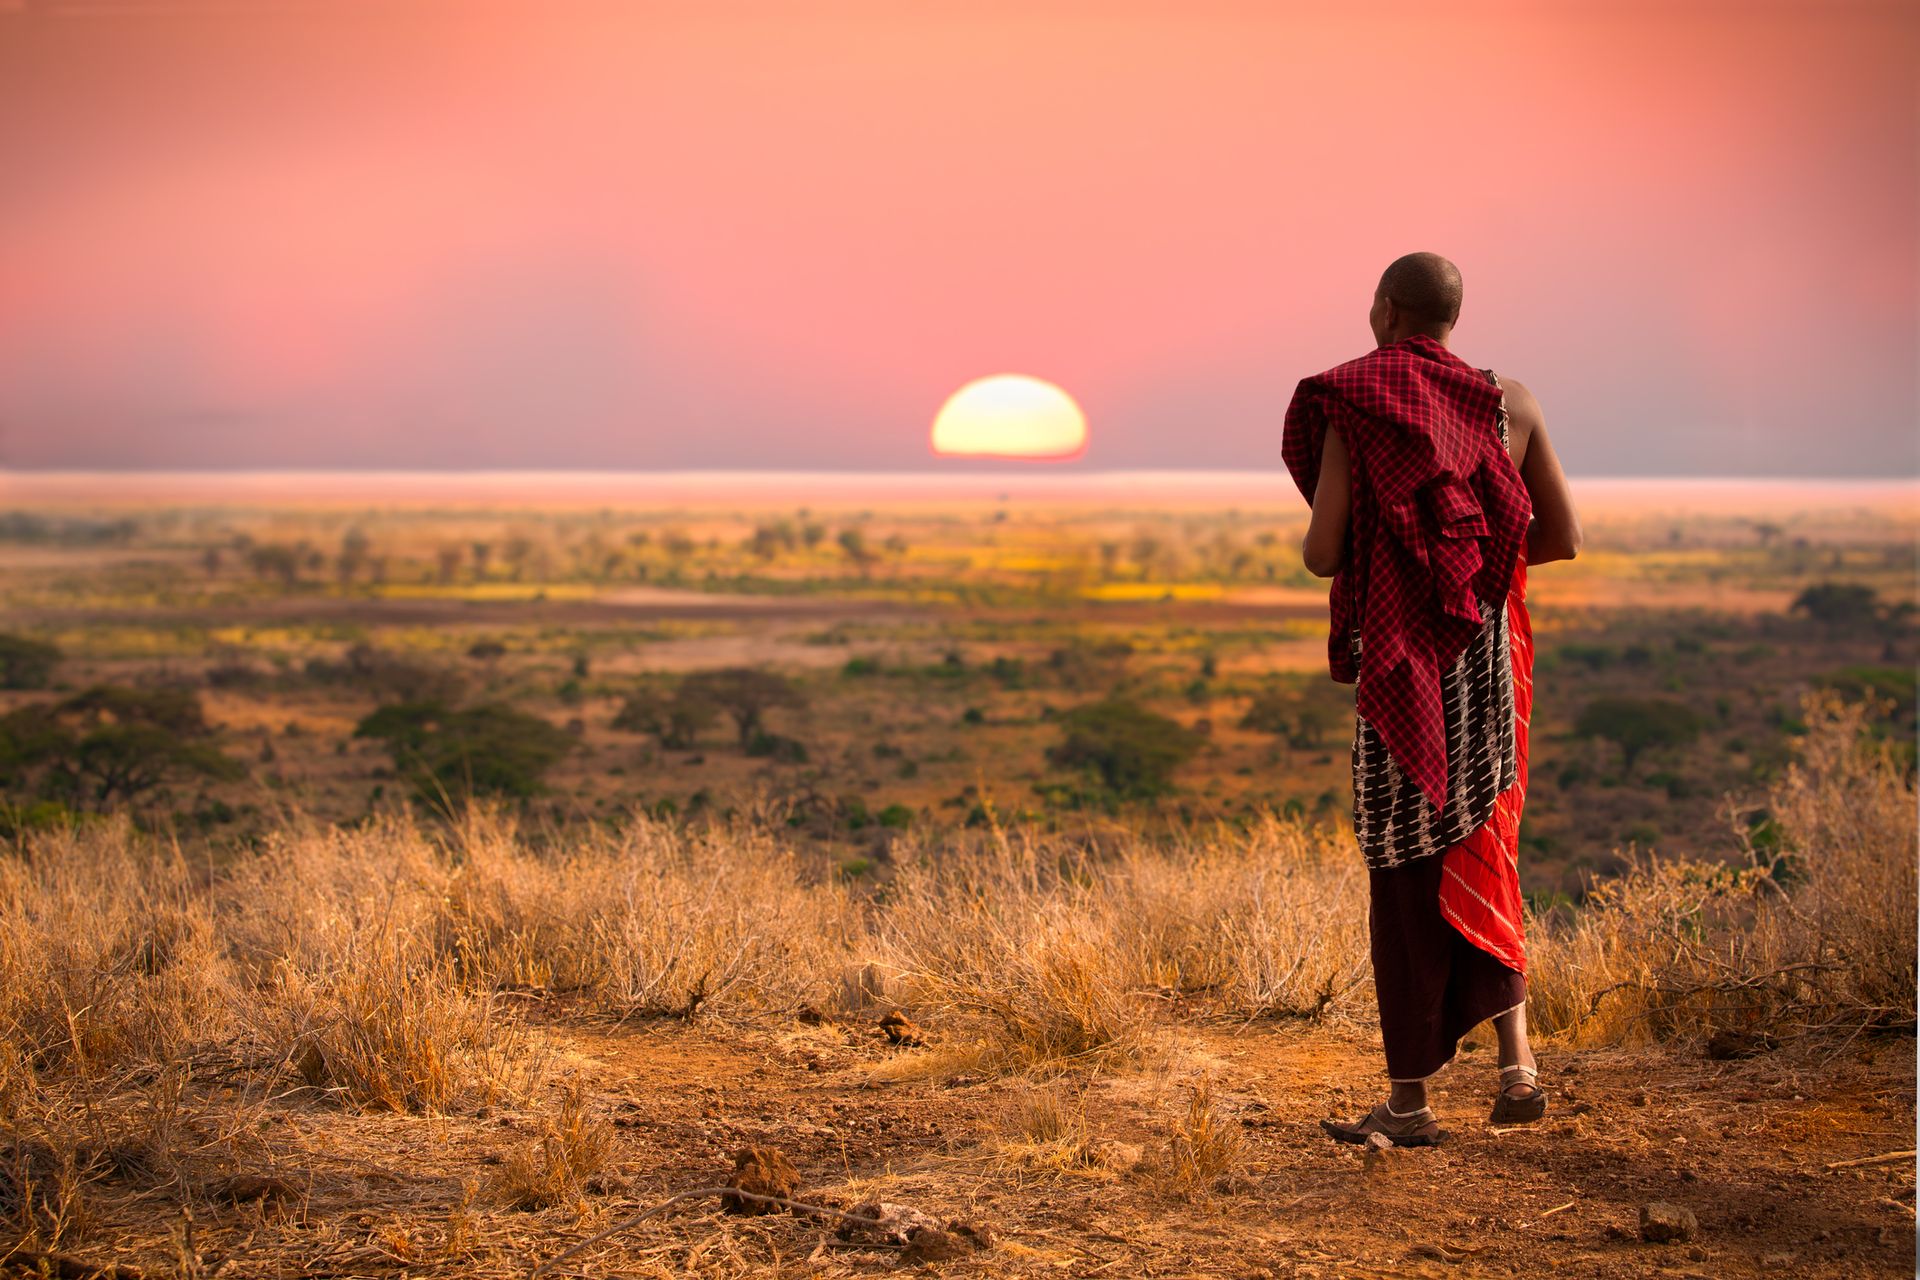 Masai man, wearing traditional blankets, overlooks Serengeti in Tanzania as the colorful sunset fills the sky.  Wild grass in the forground.